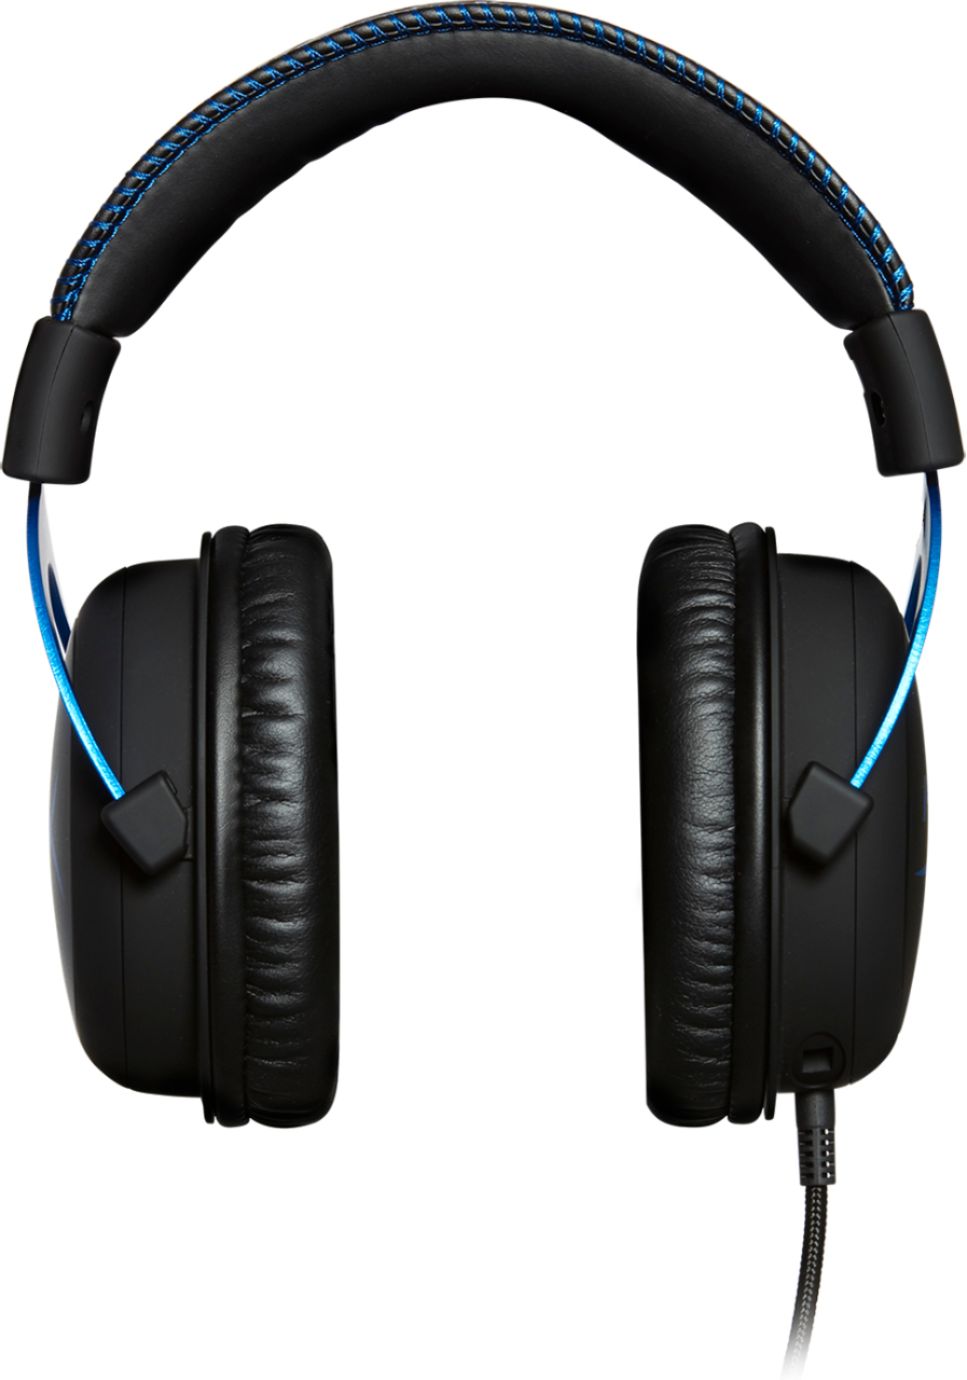 Hyperx Cloud Playstation Official Licensed For Ps4 Wired Stereo Gaming Headset Blue Black Hx Hscls Bl Am Best Buy